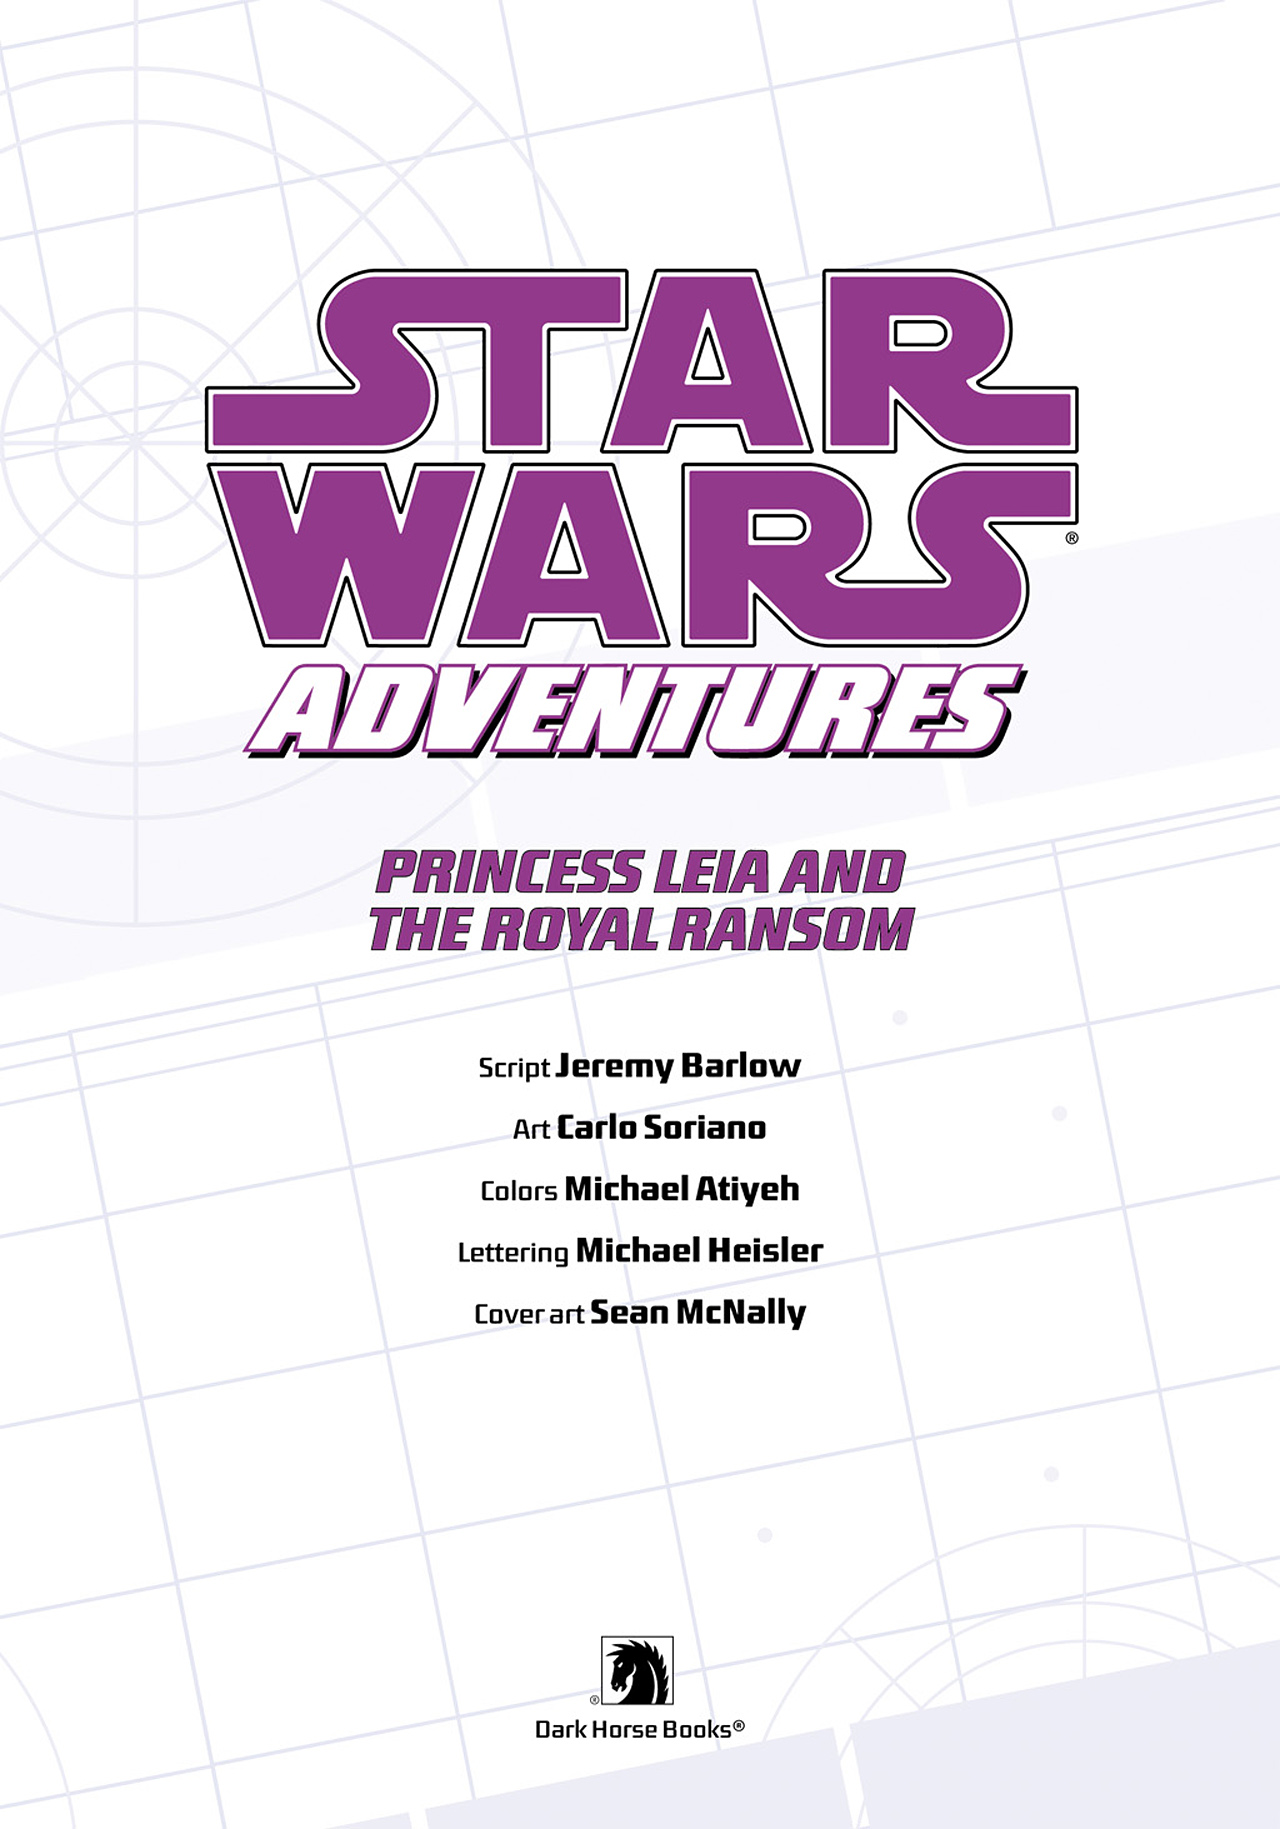 Read online Star Wars Adventures comic -  Issue # Issue Princess Leia and the Royal Ransom - 4